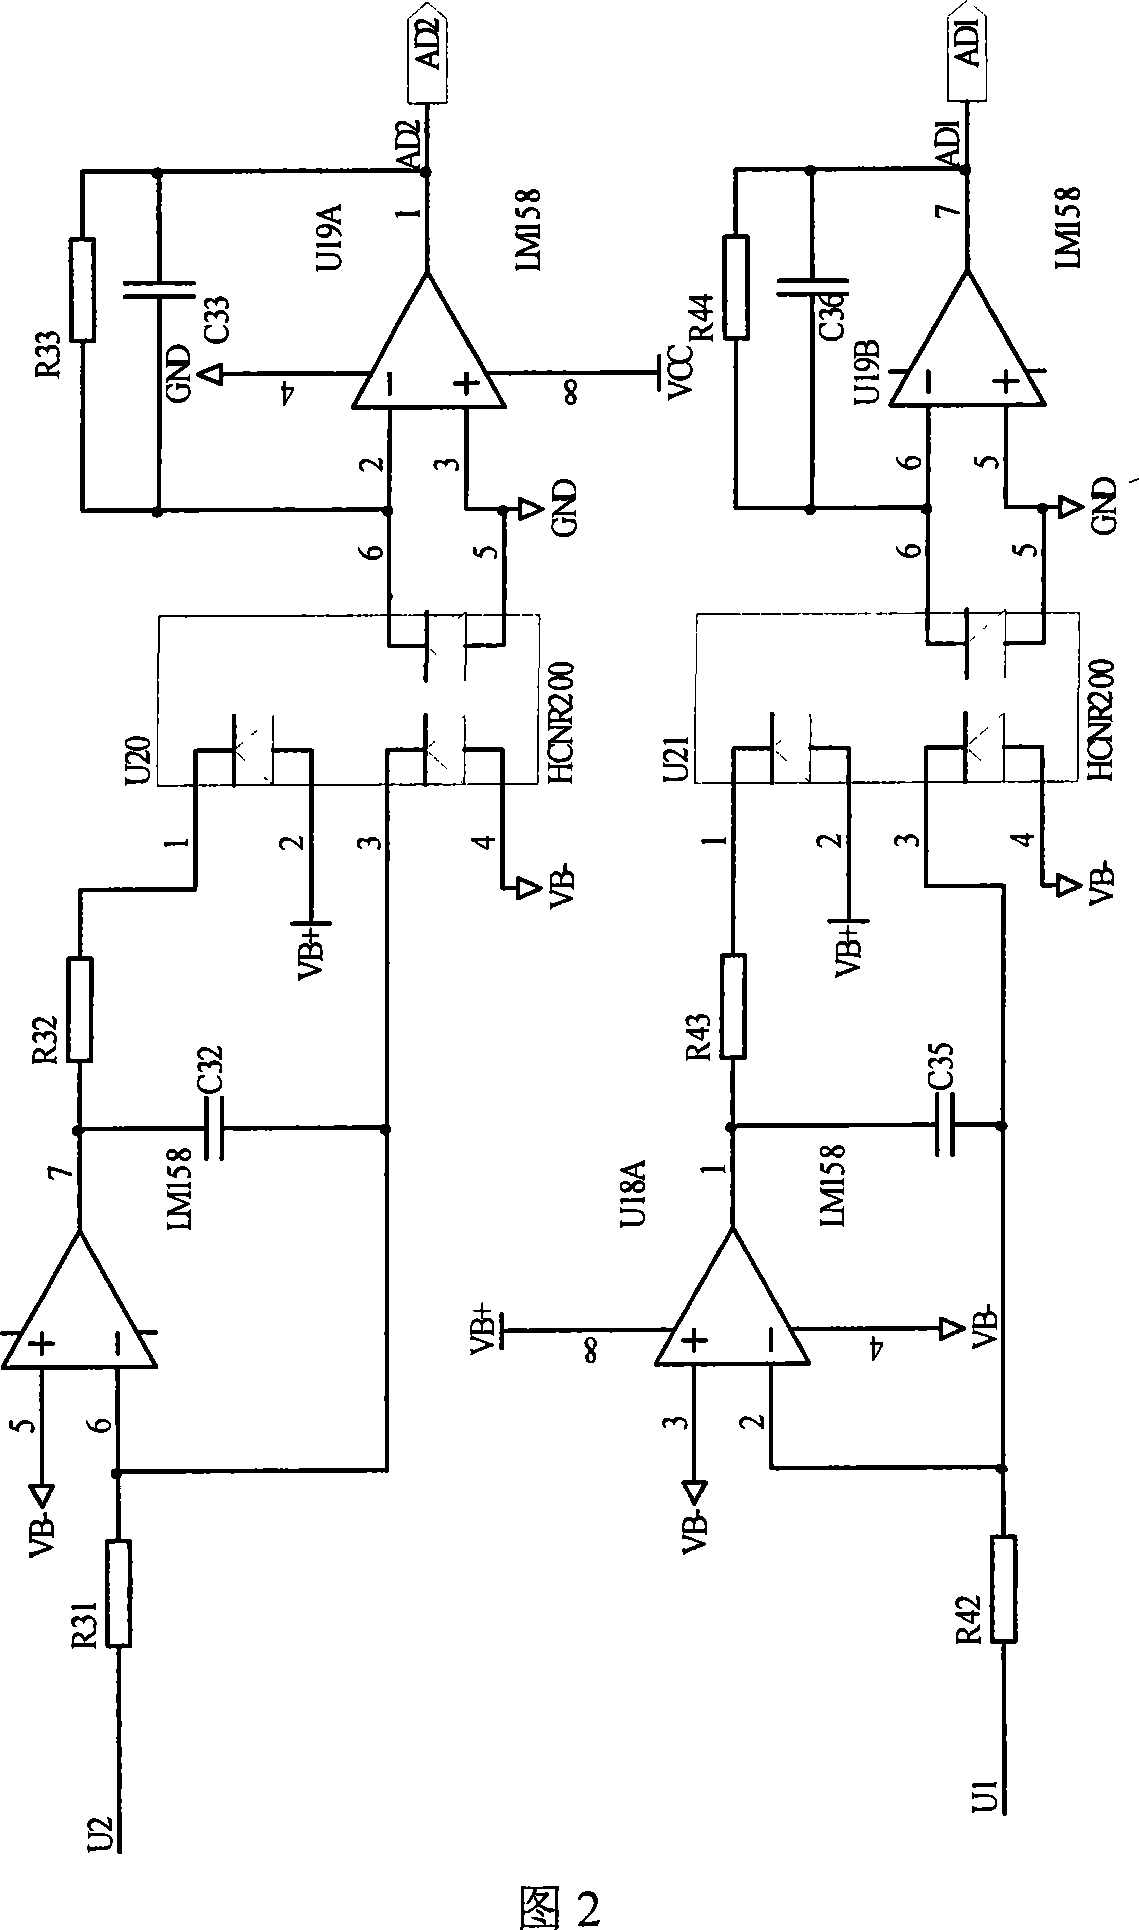 High voltage system electric voltage and insulaiton measurement circuit